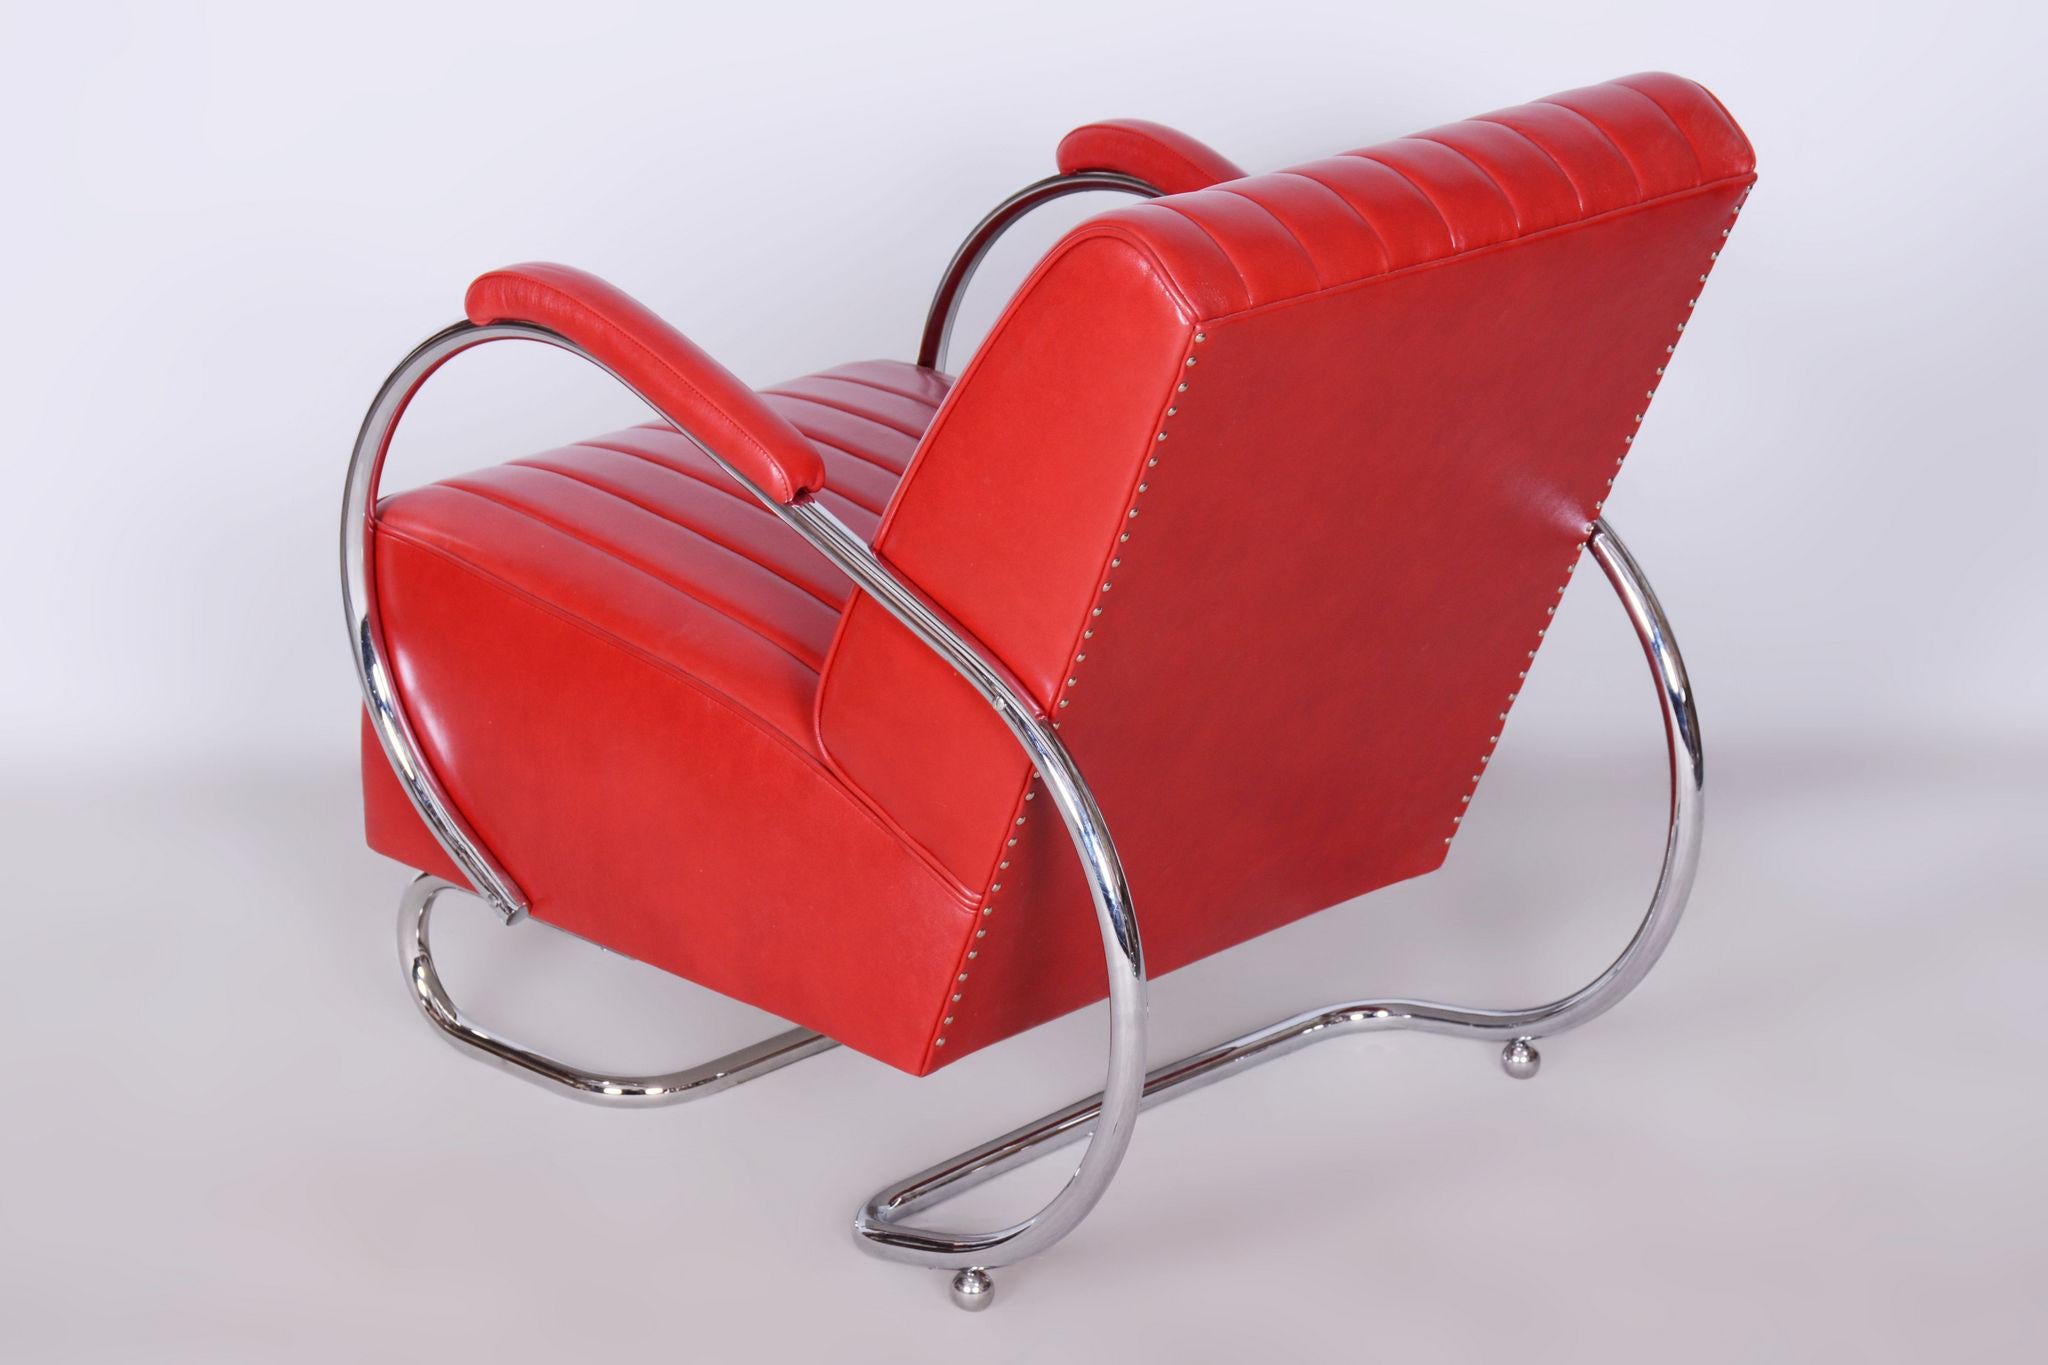 Restored Bauhaus Pair of Armchairs, by Hynek Gottwald, Leather, Czech, 1930s For Sale 8